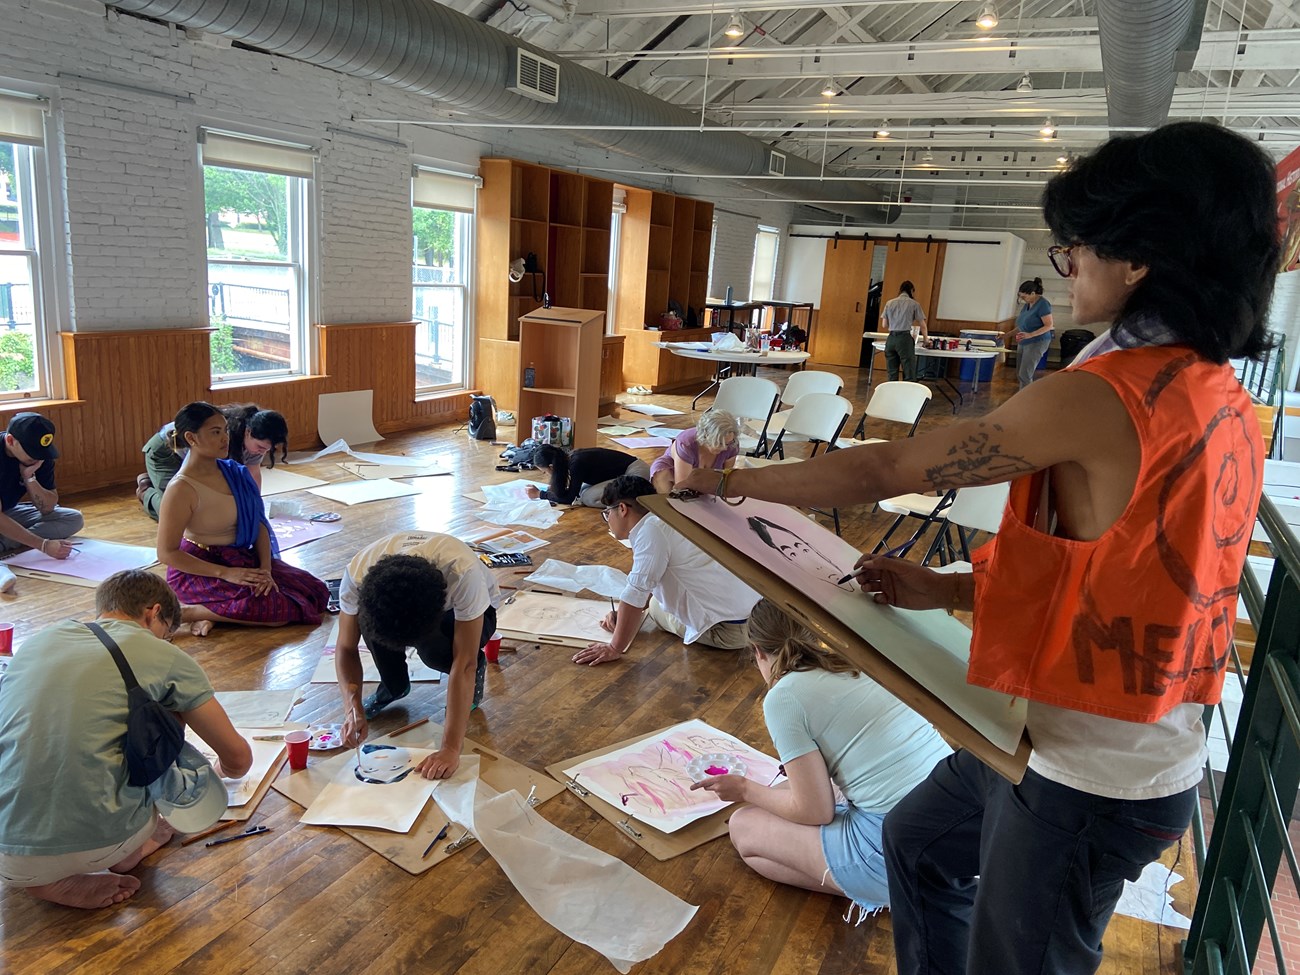 A group of people kneeling, sketching and painting on paper with a dancer posed among them, one artist stands with a orange vest sketching the dancer.